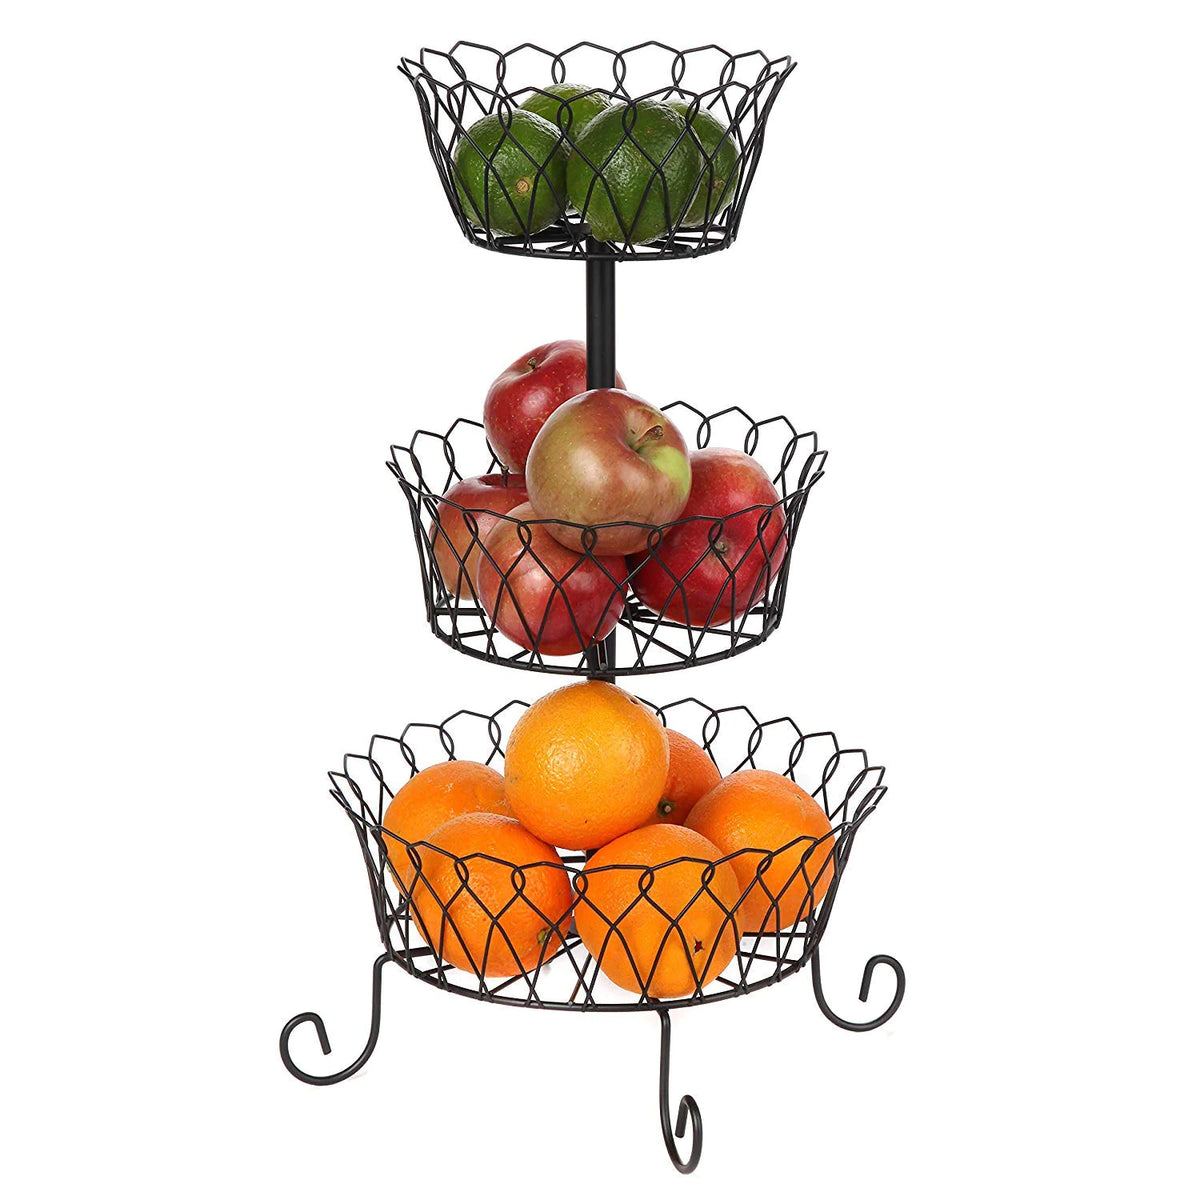 3 Tier Wire Fruit Basket Stand for Storing and Organizing Vegetables, Eggs, and More, Black - WV